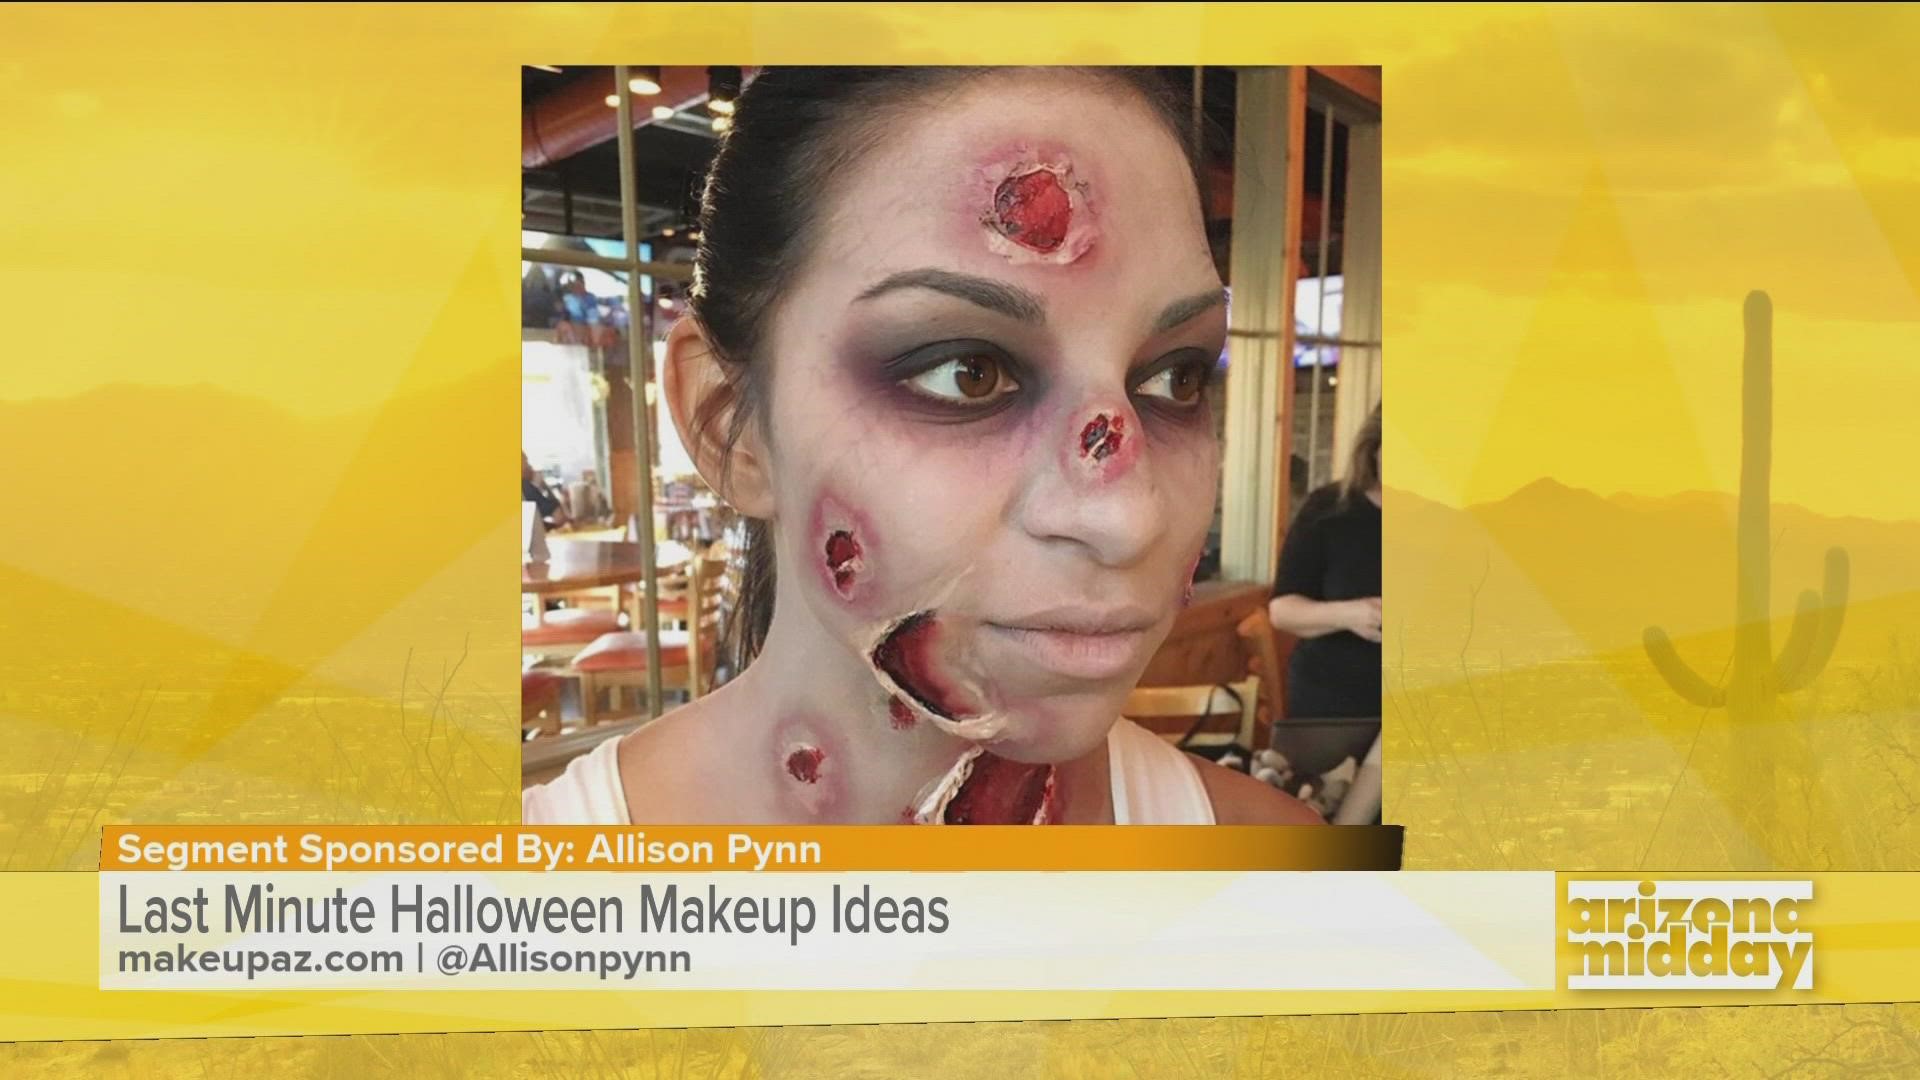 Local makeup artist Allison Pynn showed us a few easy last minute makeup ideas to transform your look on Halloween Night!